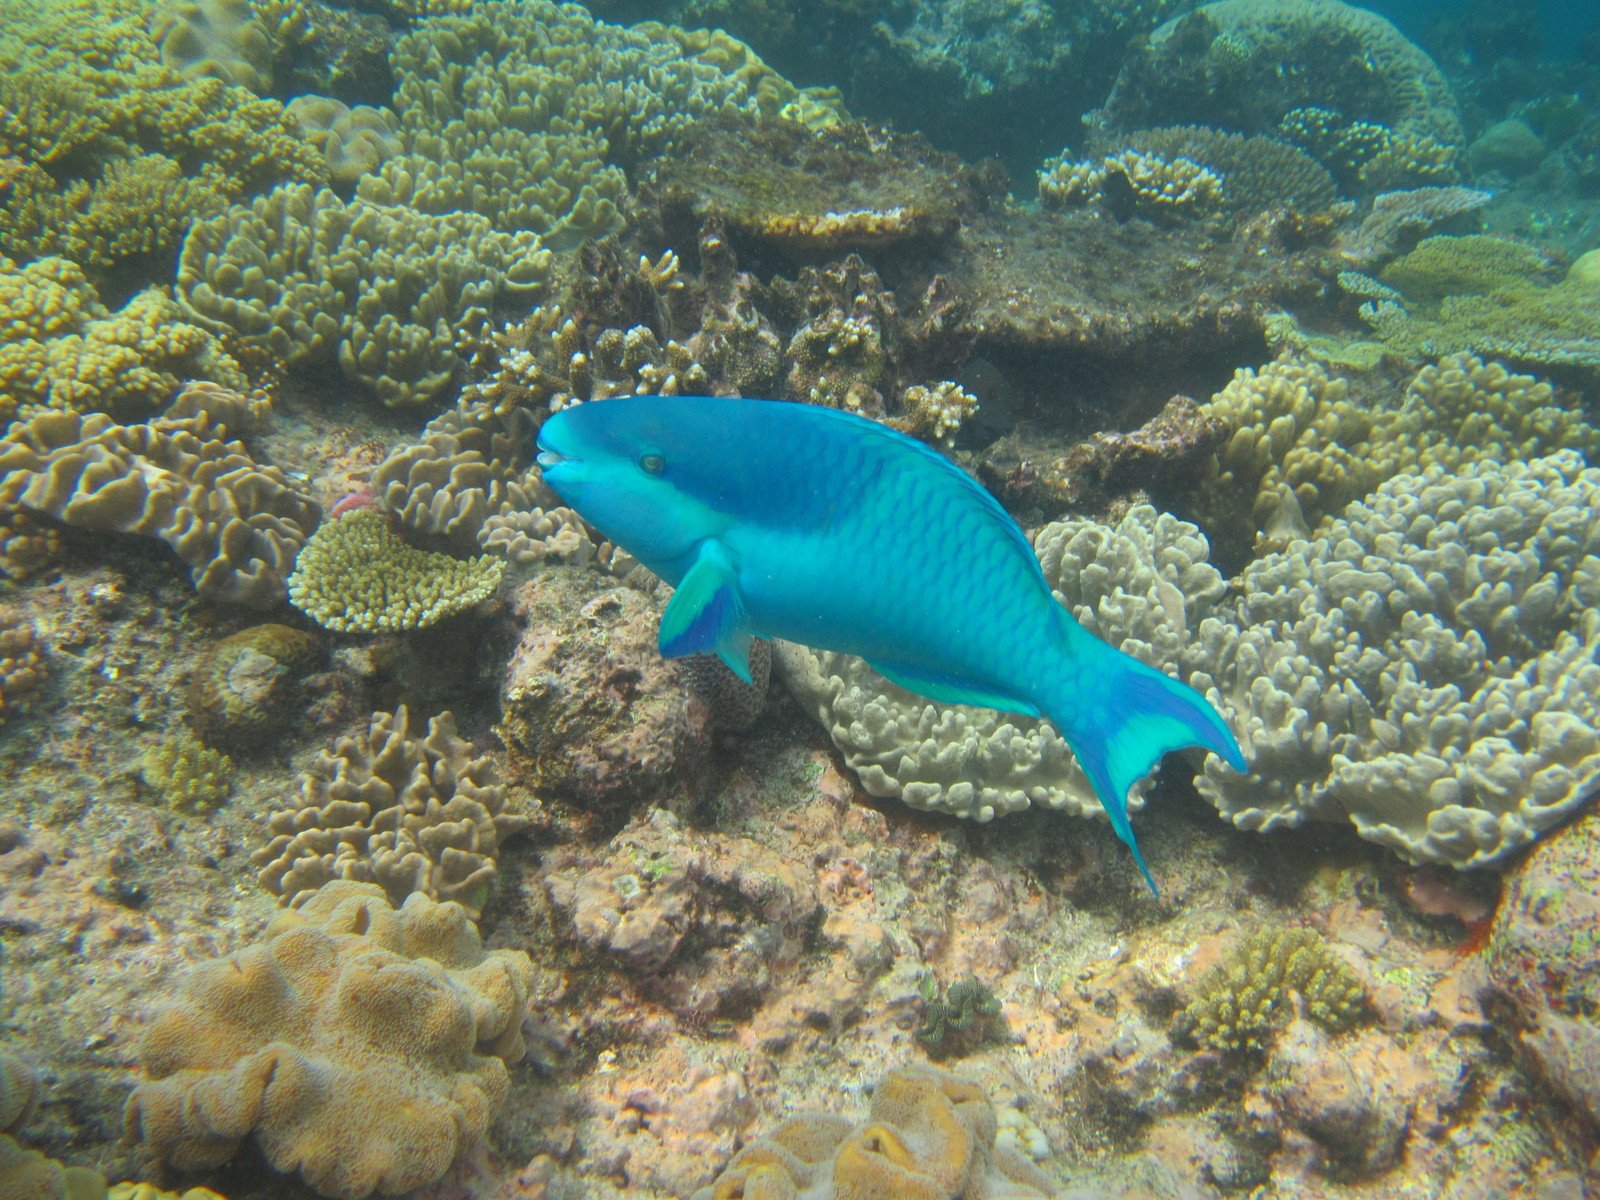 a blue fish swimming on the sea floor